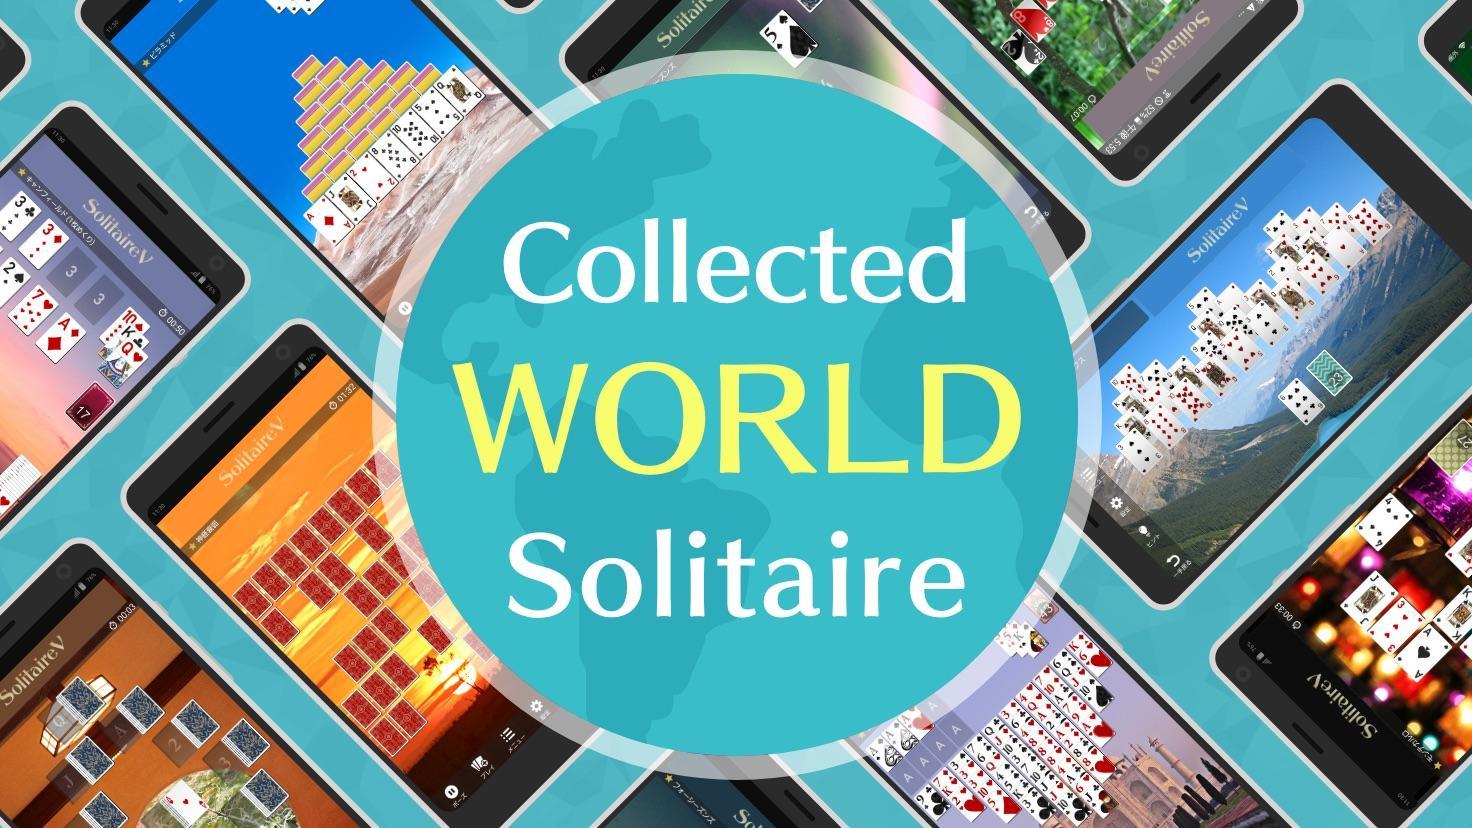 Solitaire Victory - 2020 Solitaire Collection 100 8.3.2 Screenshot 17